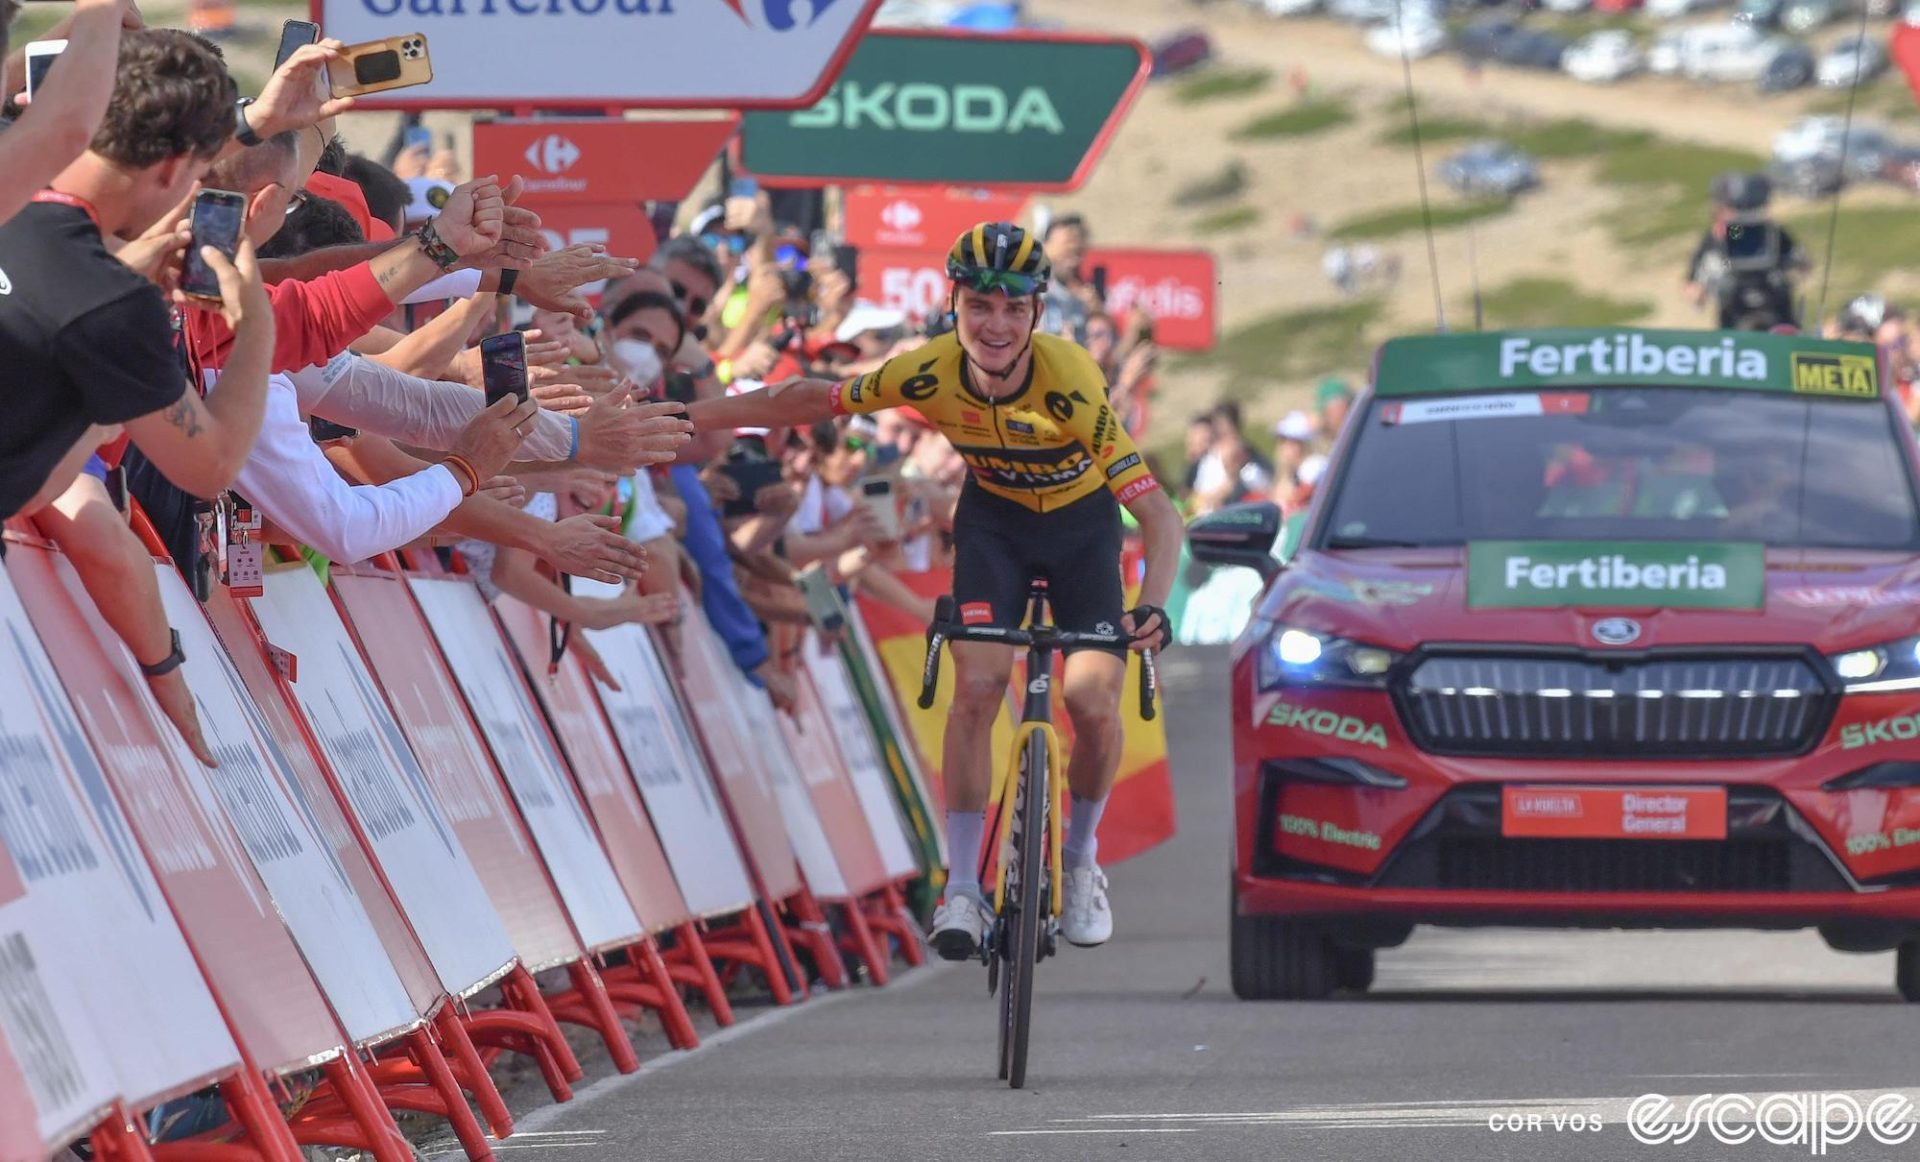 Sepp Kuss rides to the finish on stage 6 of the 2023 Vuelta a España. He's alone, with just the red race official's car behind him, and is riding near the barriers with his arm out to give high-fives to the fans lining the road.